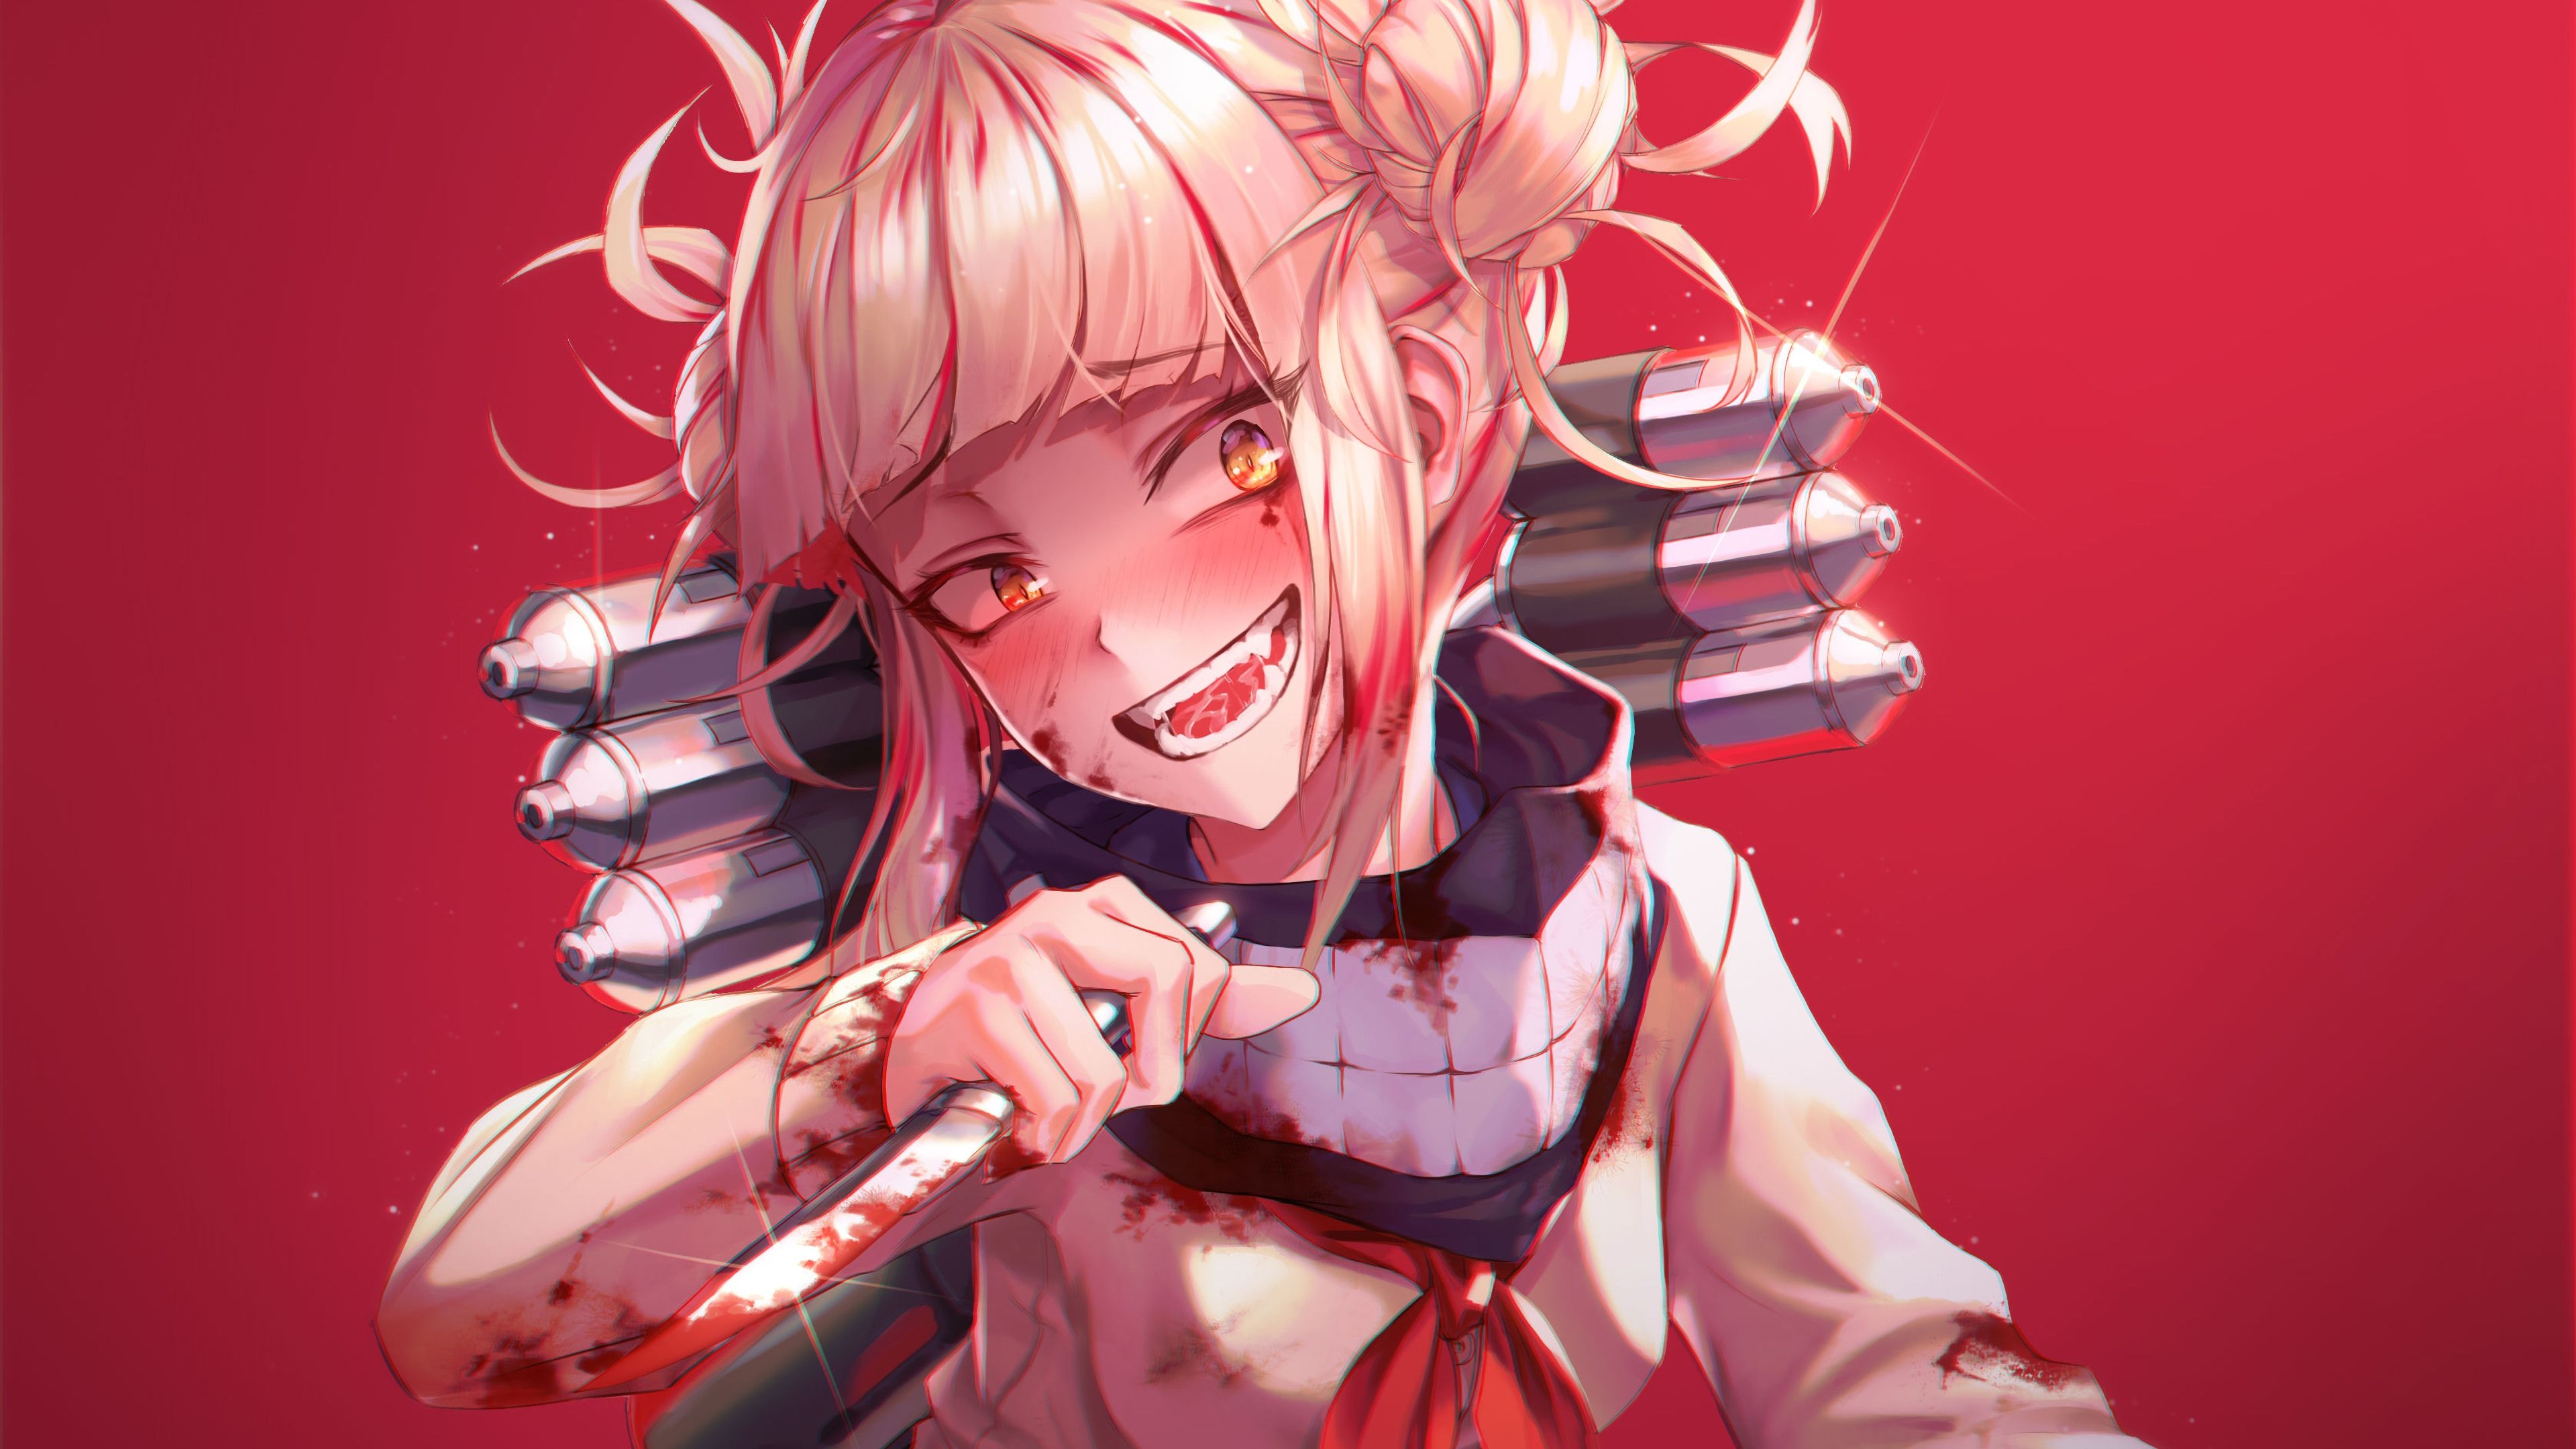 170 Himiko Toga Hd Wallpapers And Backgrounds - vrogue.co